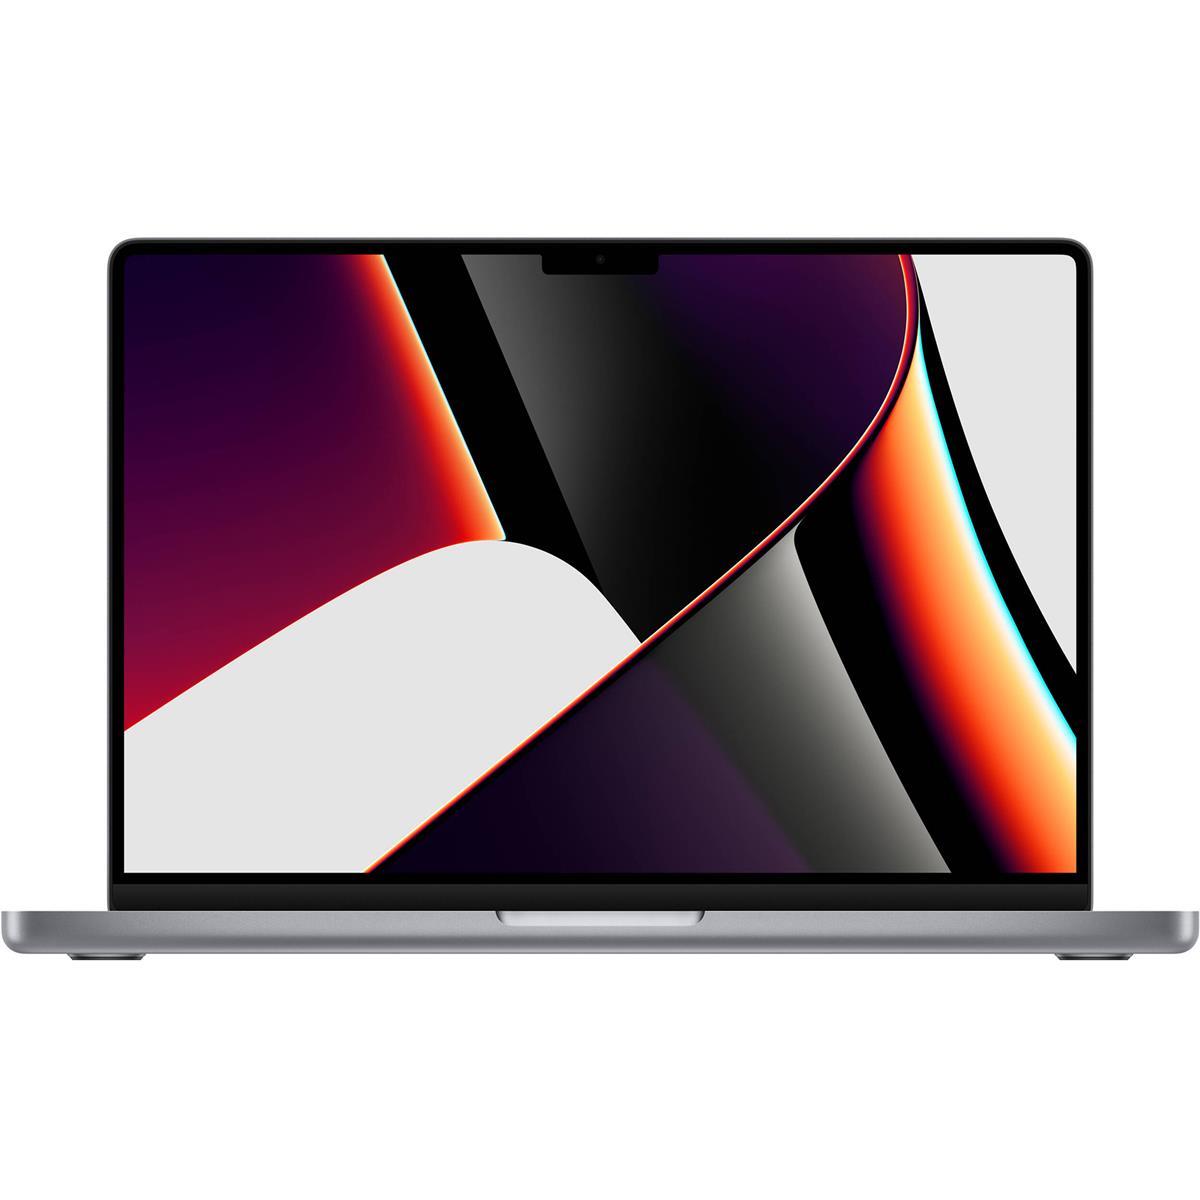 Apple MacBook Pro M1 16GB 512GB Notebook Laptop for $1799 Shipped